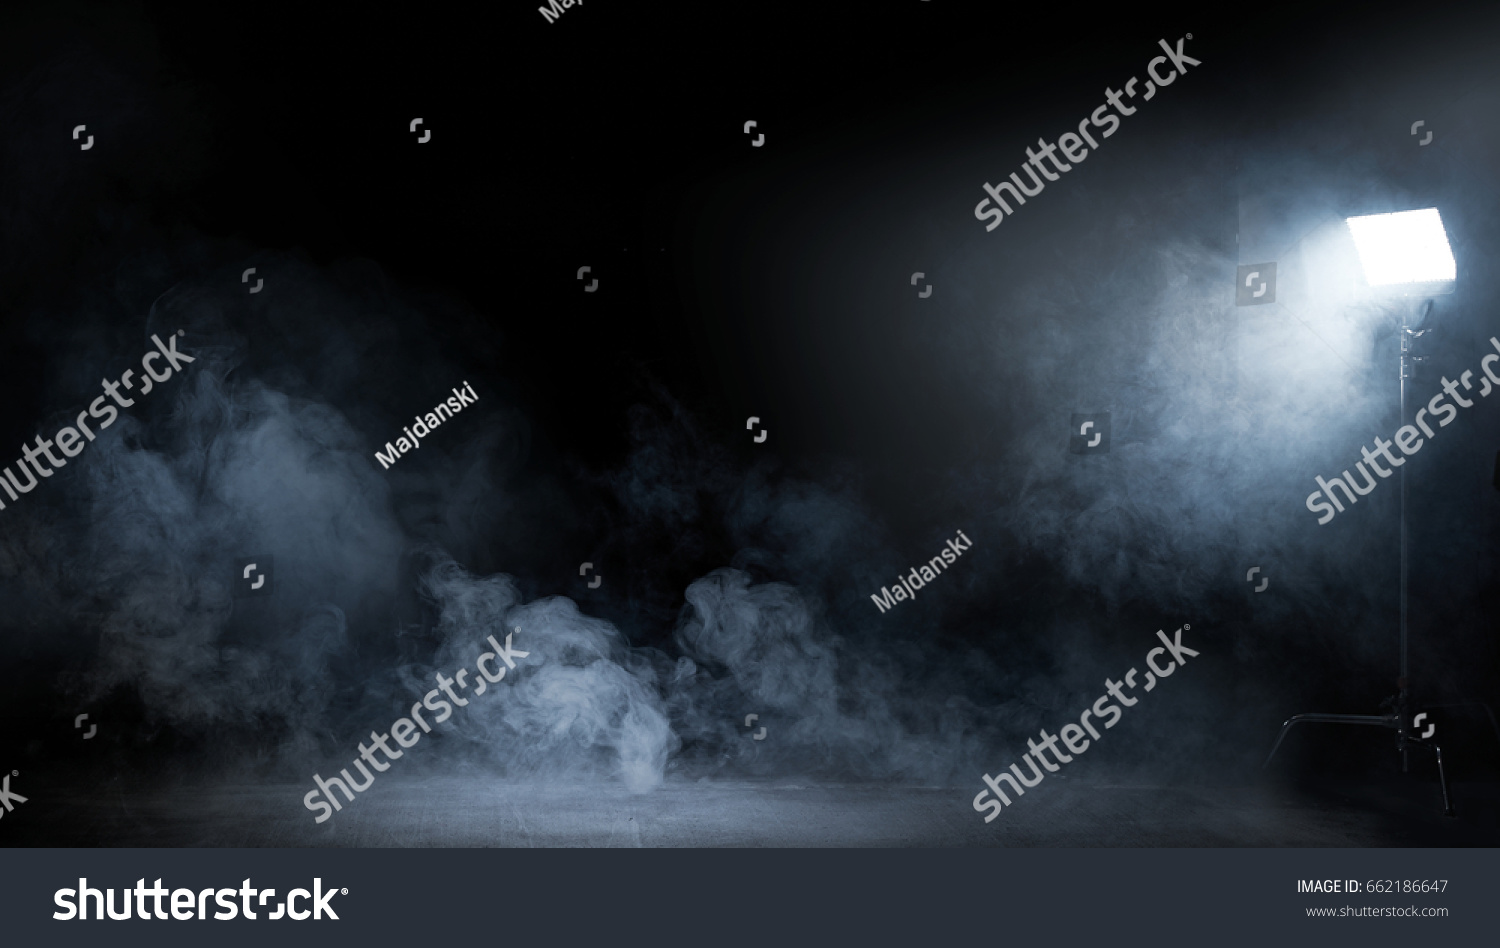 Conceptual image of a dark interior full of swirling fume #662186647